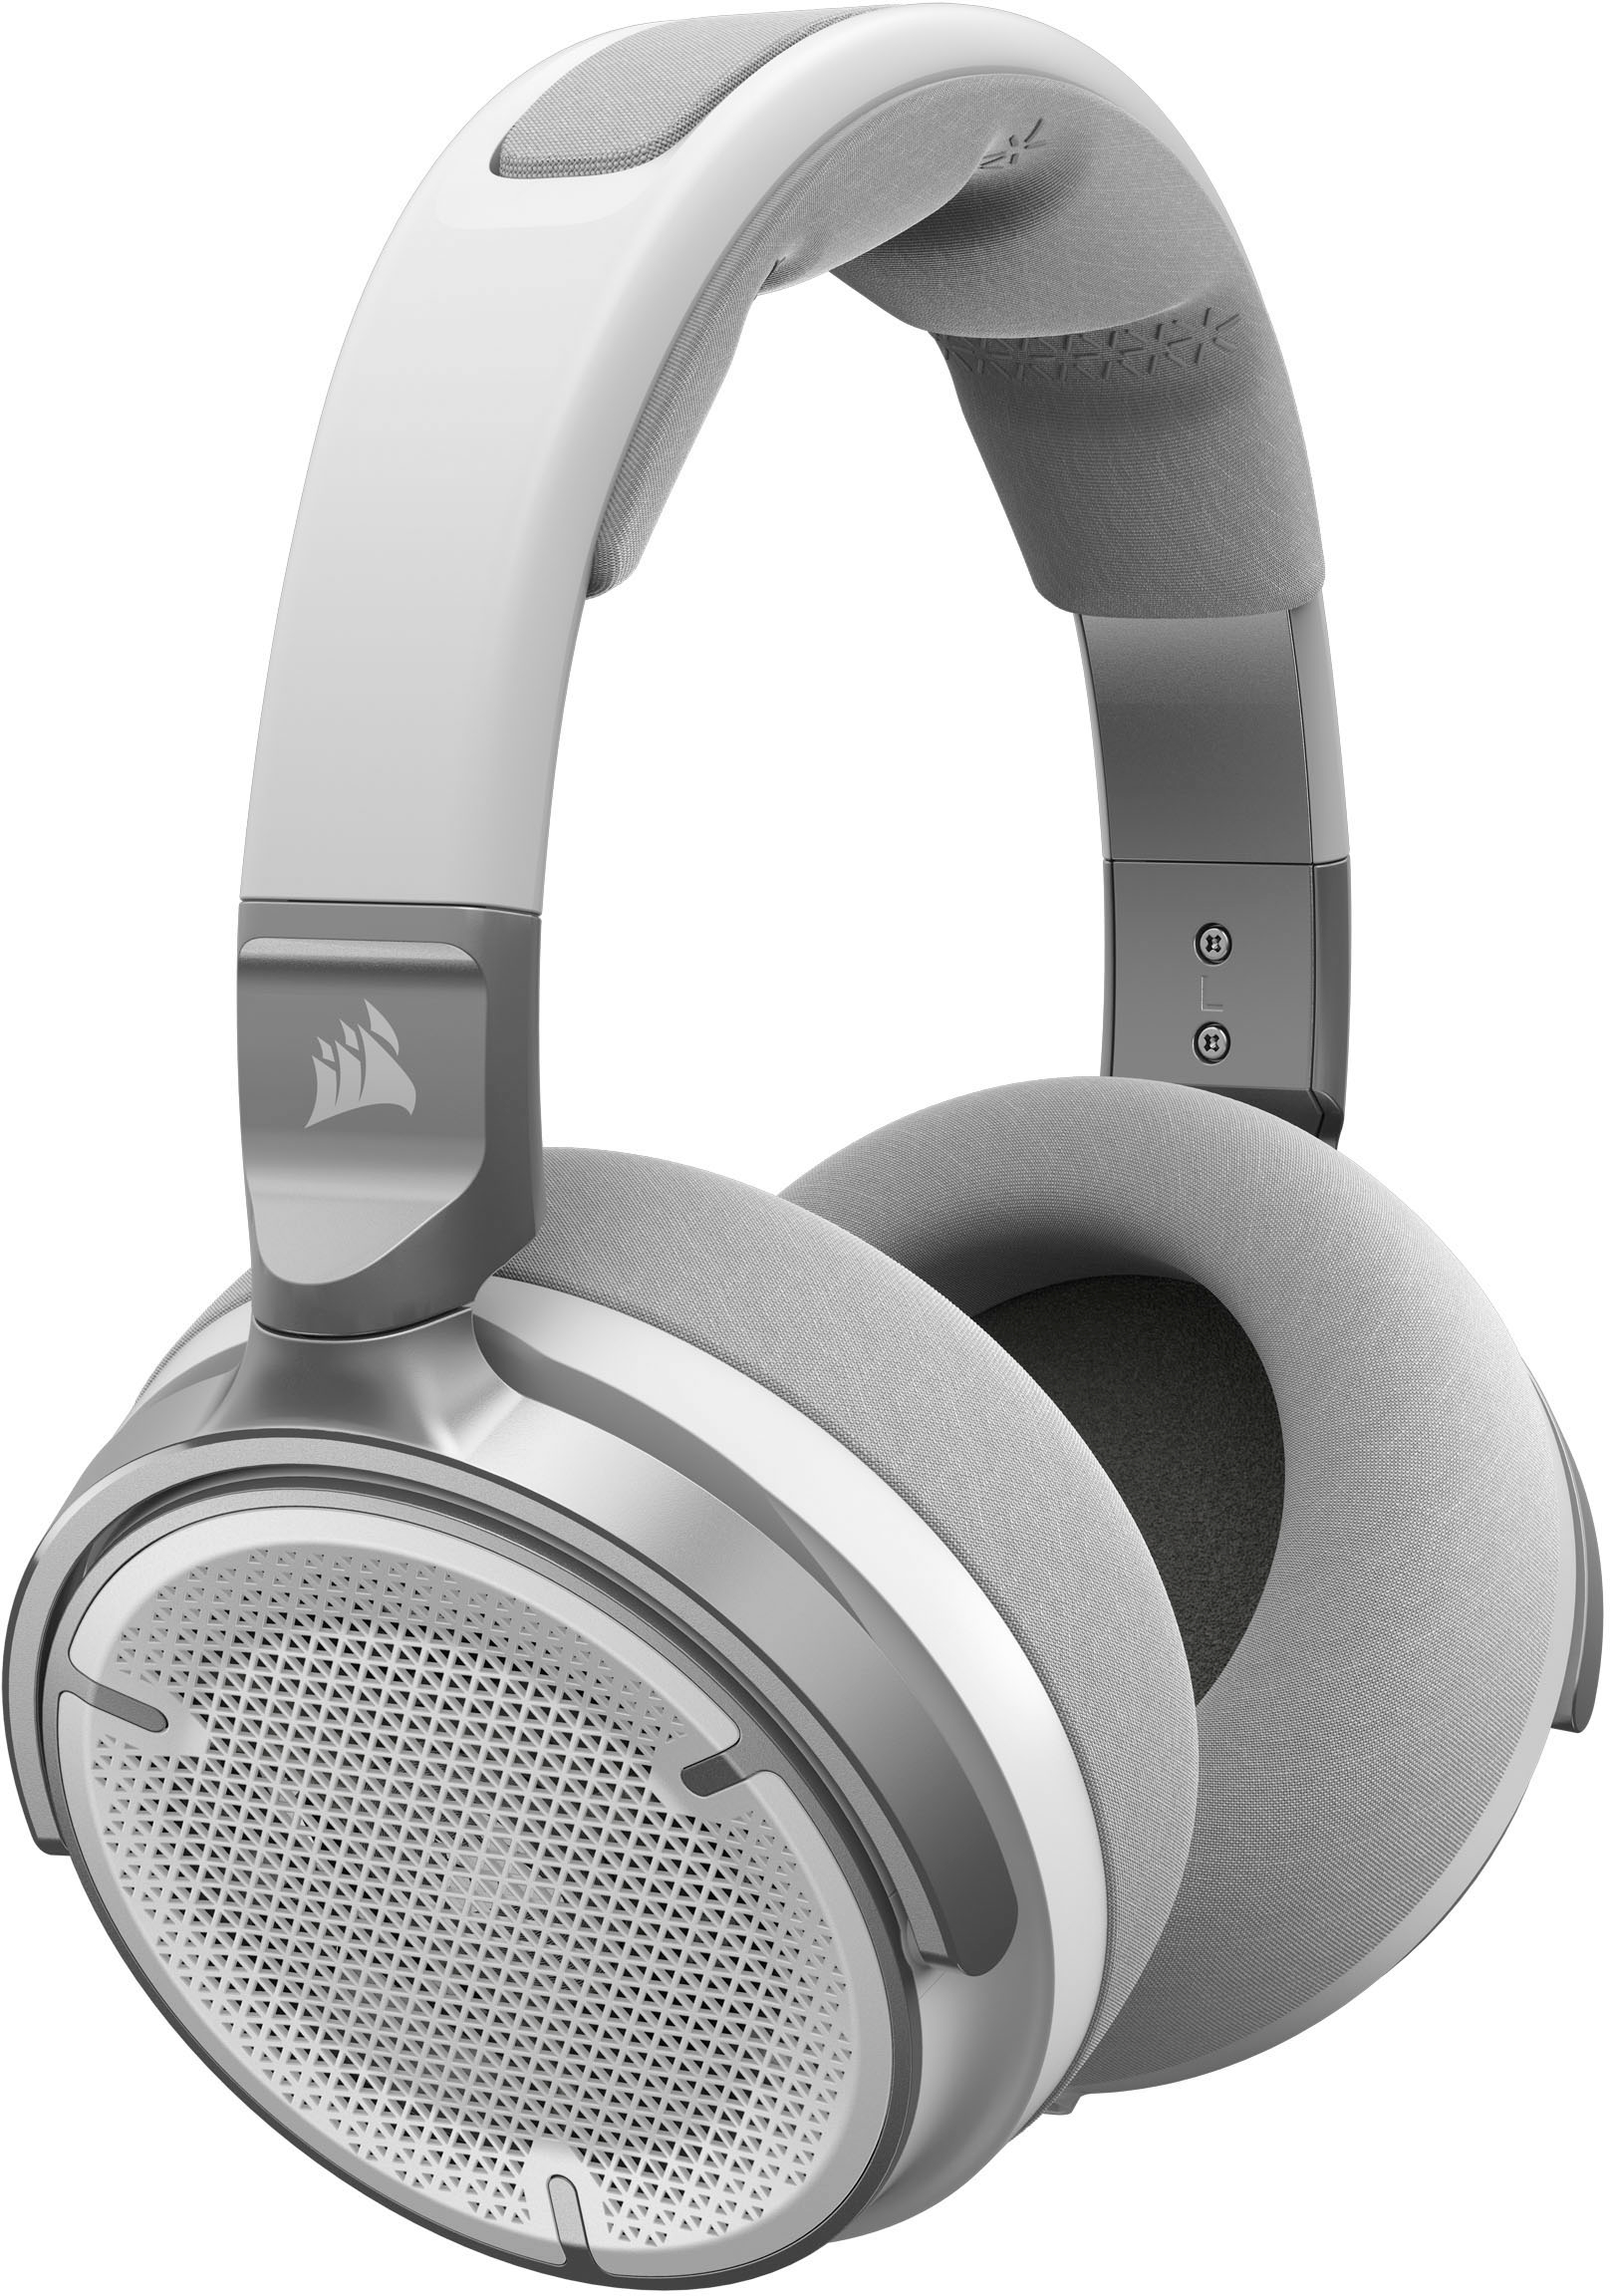 CORSAIR VIRTUOSO PRO Buy Best Headset Streaming/Gaming Back White Open - CA-9011371-NA Wired